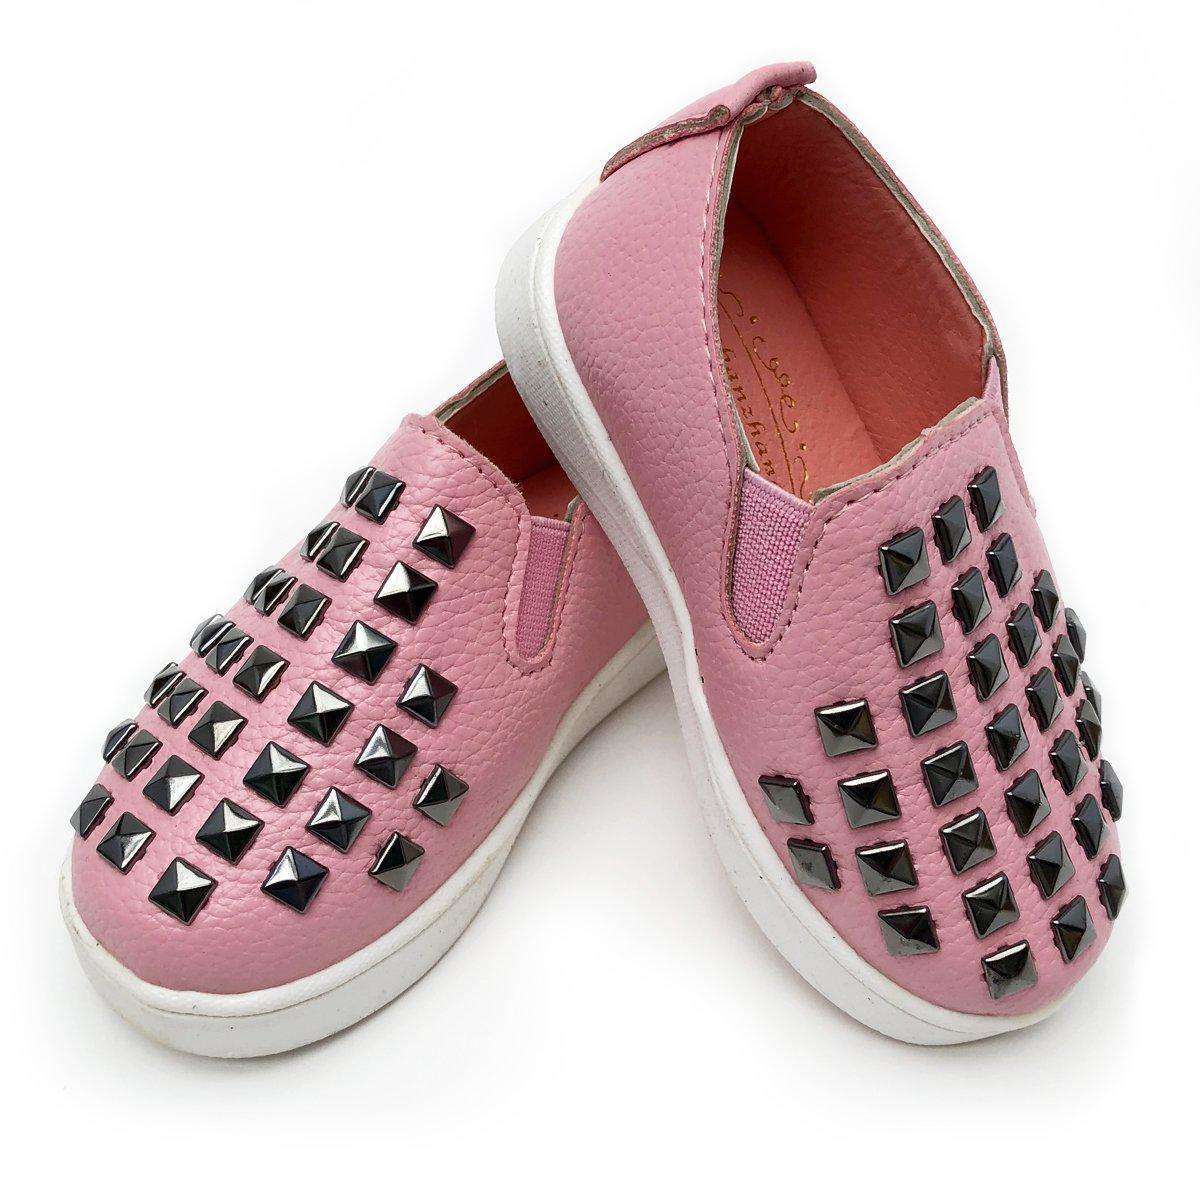 Kids pink stud faux leather shoes